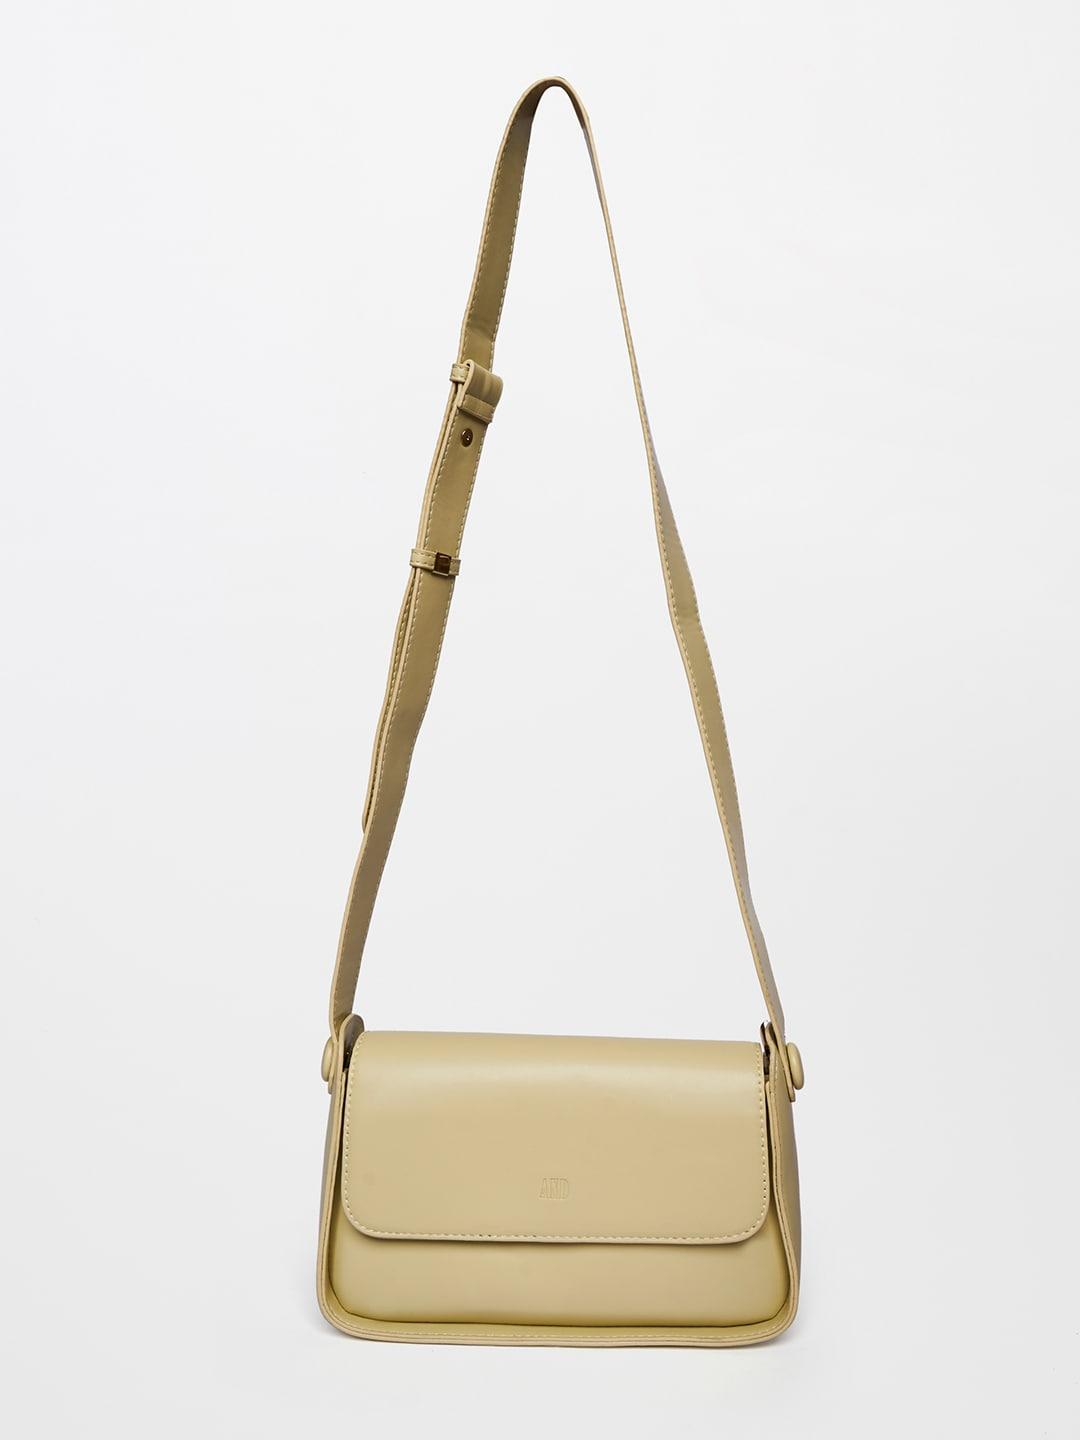 AND Beige PU Structured Sling Bag